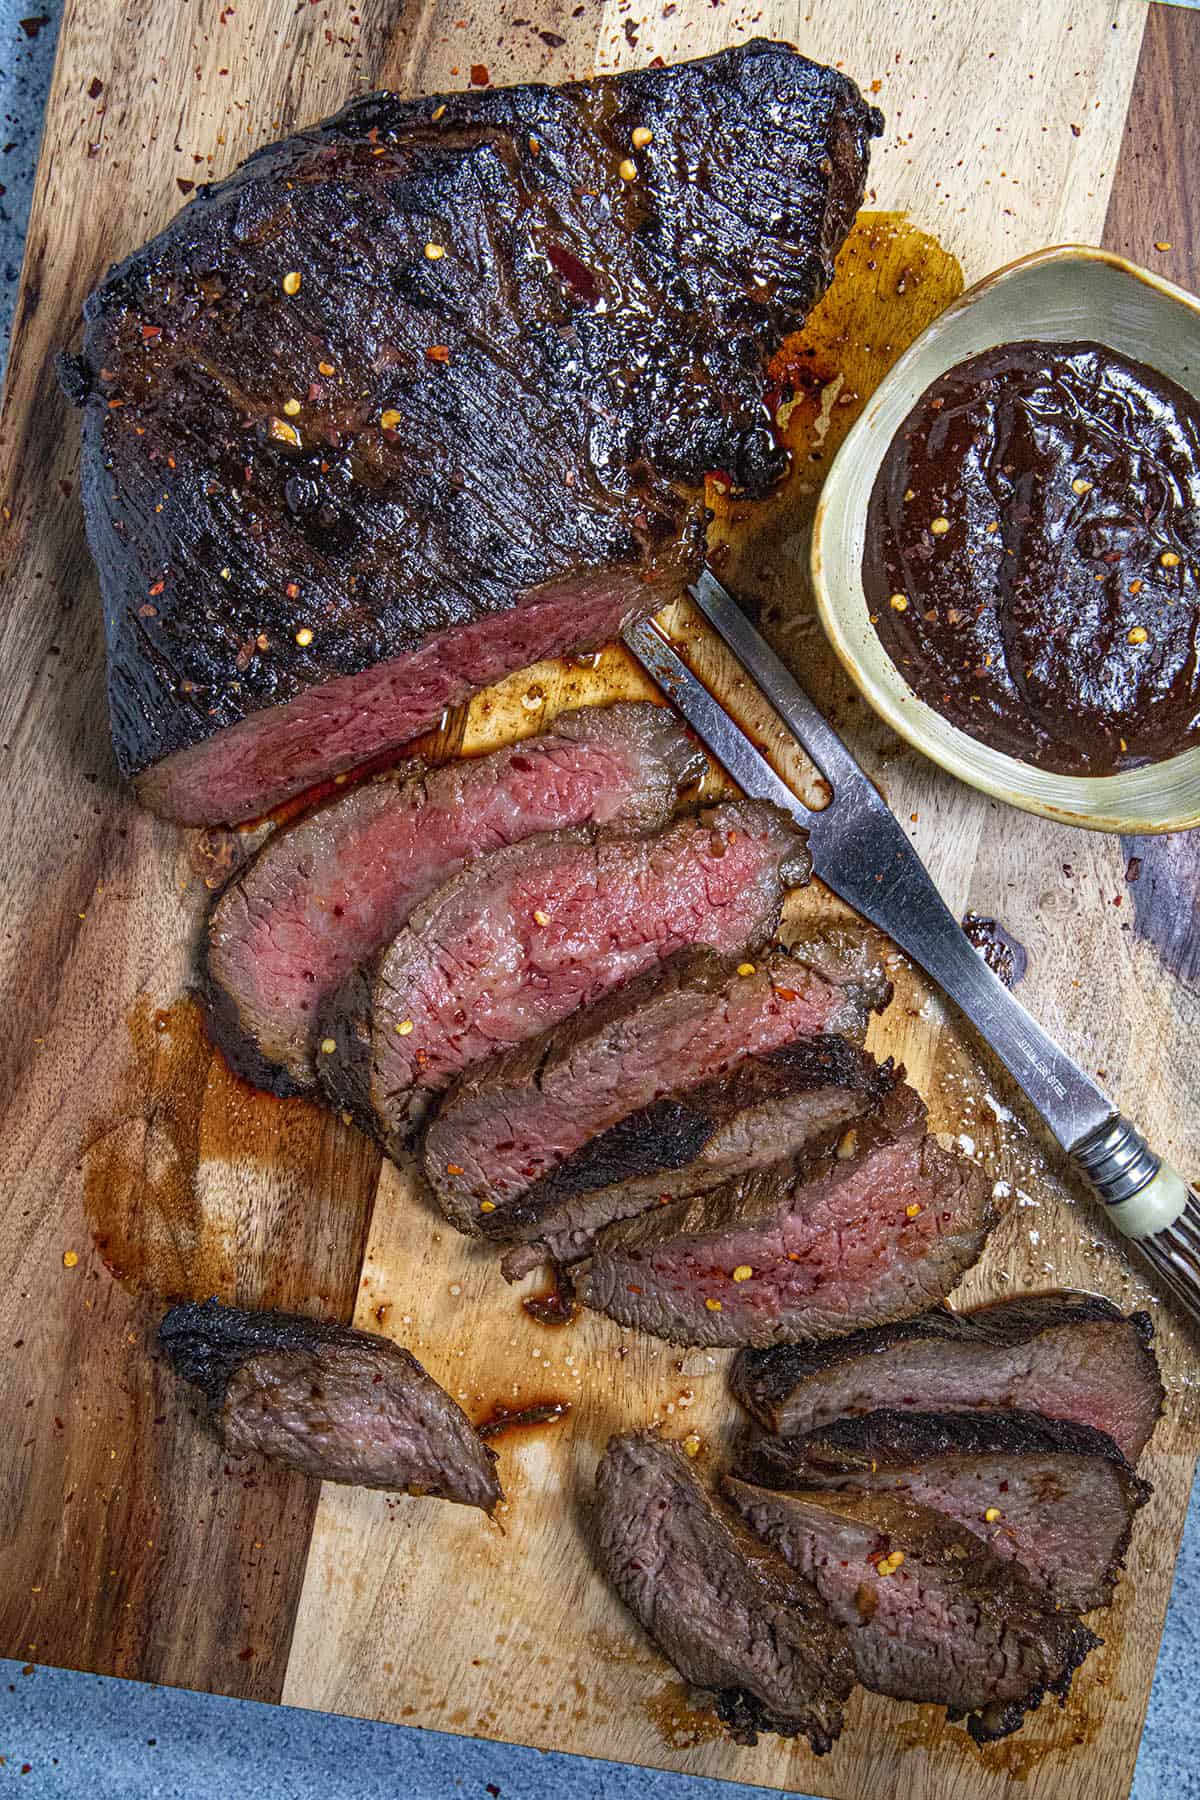 Sliced marinated tri tip steaks, ready to serve with gravy